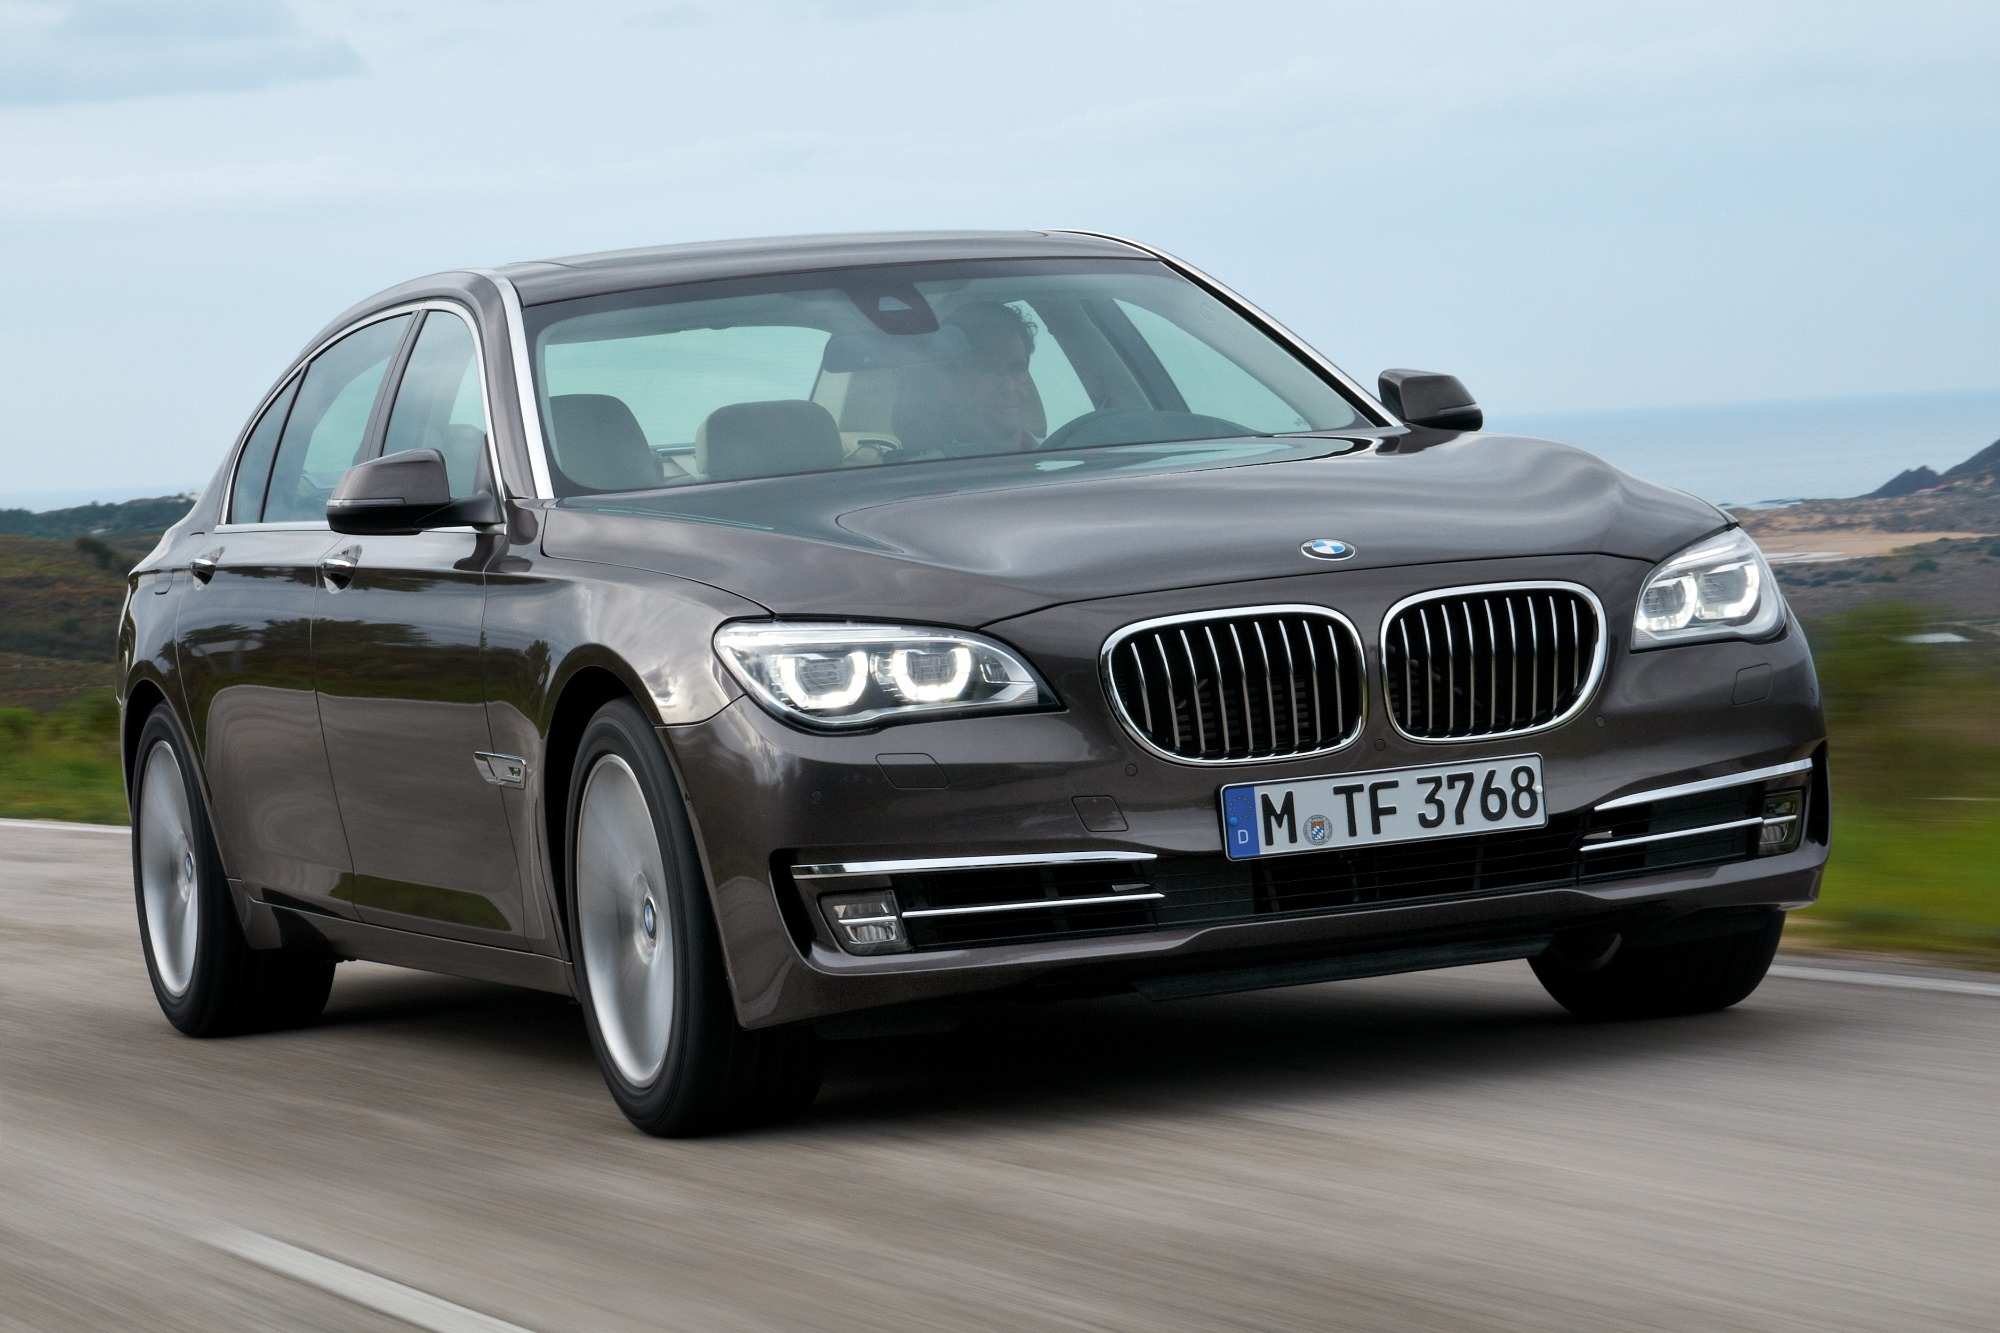 2013 BMW 740Li xDrive Sedan Full Specs, Features and Price | CarBuzz